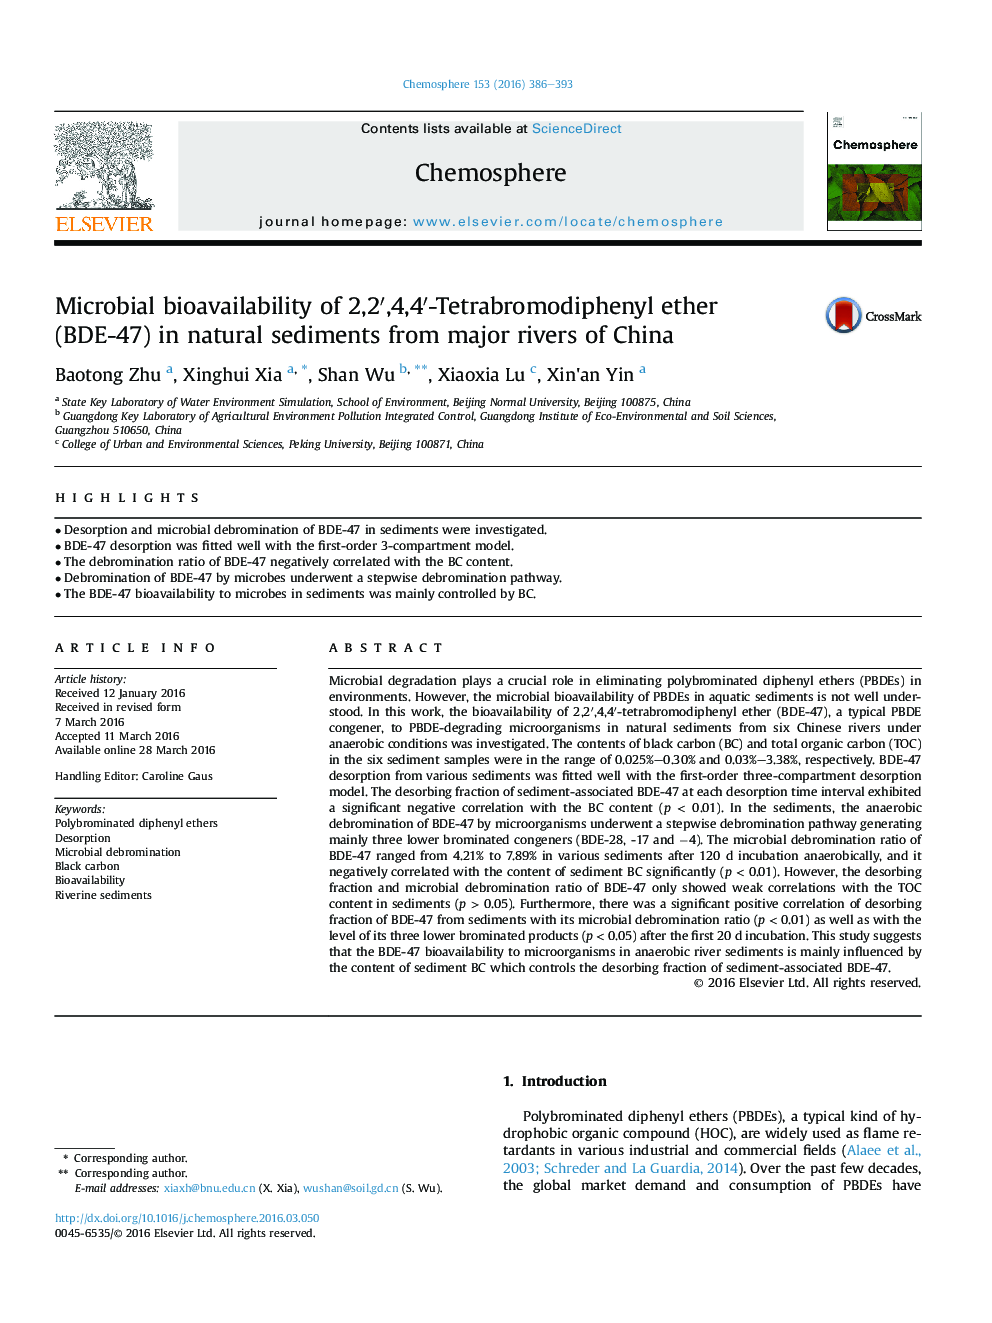 Microbial bioavailability of 2,2′,4,4′-Tetrabromodiphenyl ether (BDE-47) in natural sediments from major rivers of China